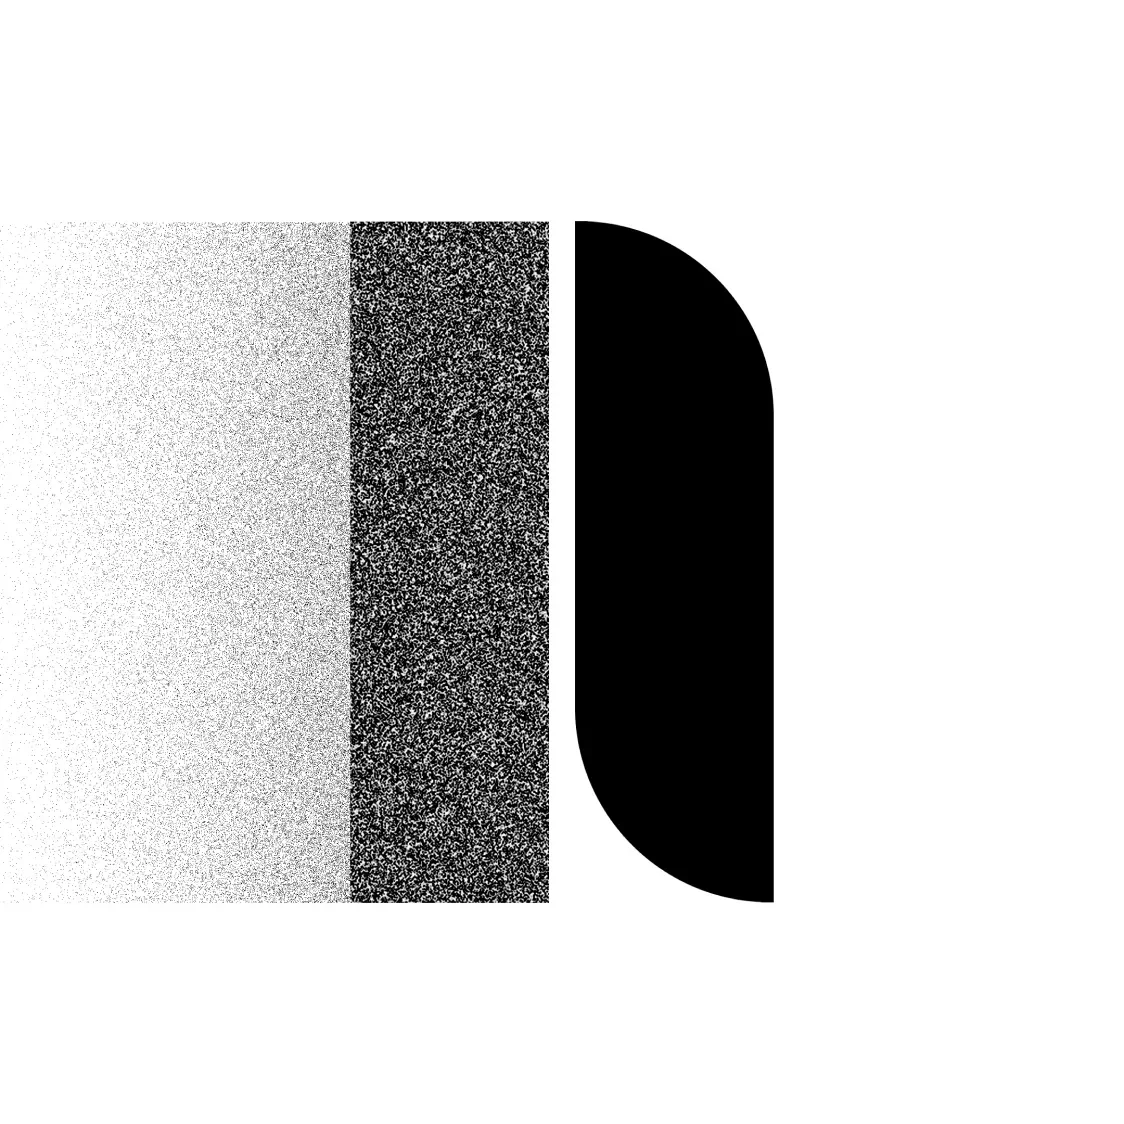 The letter 'n' made out of simple shapes and gradients of grainy black and white